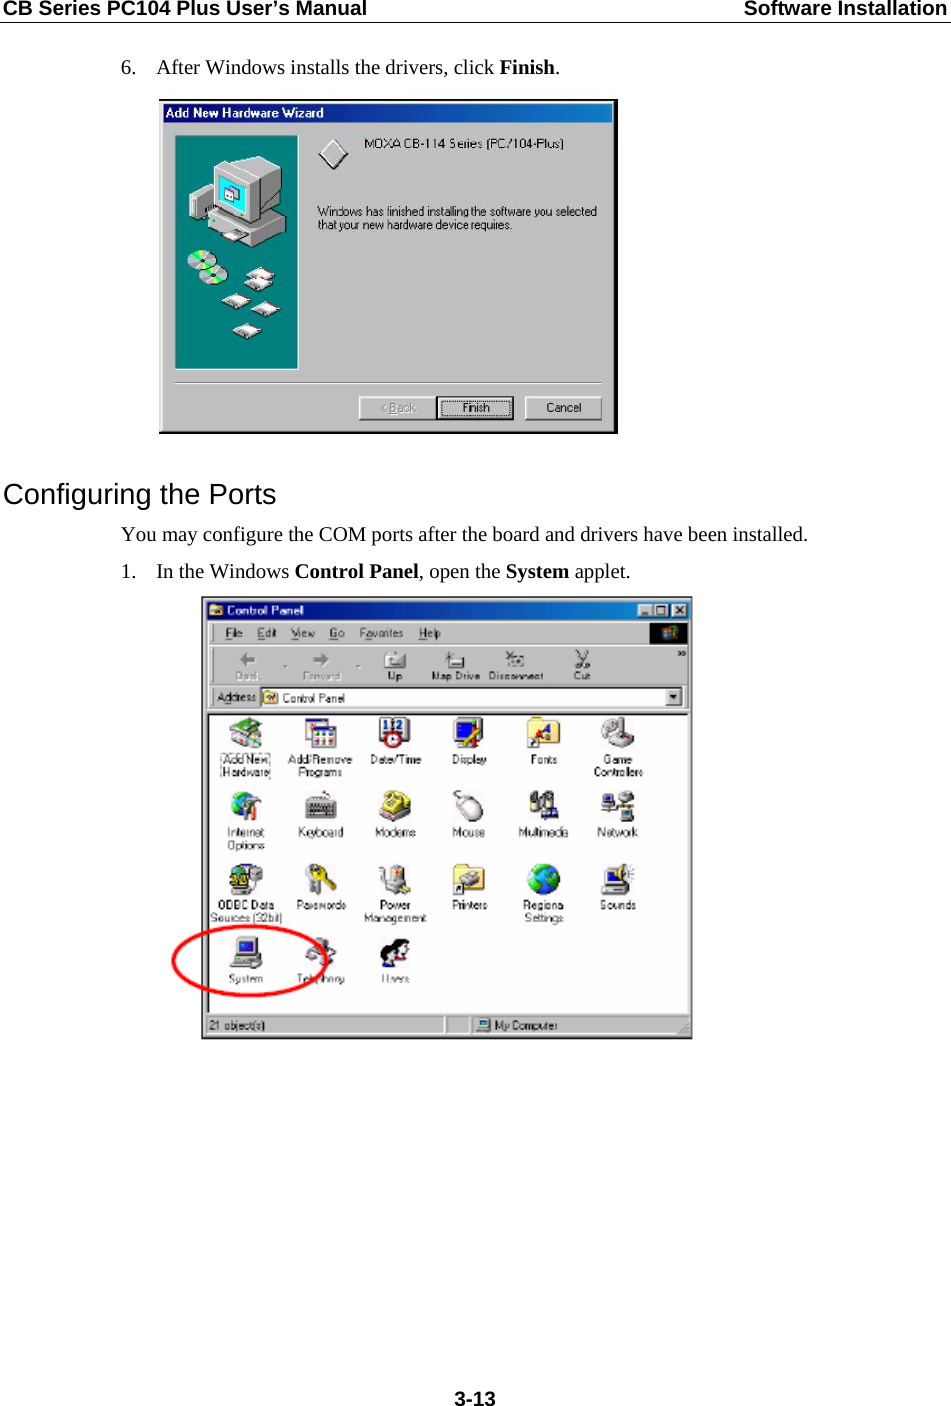 CB Series PC104 Plus User’s Manual  Software Installation 6. After Windows installs the drivers, click Finish.  Configuring the Ports You may configure the COM ports after the board and drivers have been installed. 1. In the Windows Control Panel, open the System applet.   3-13